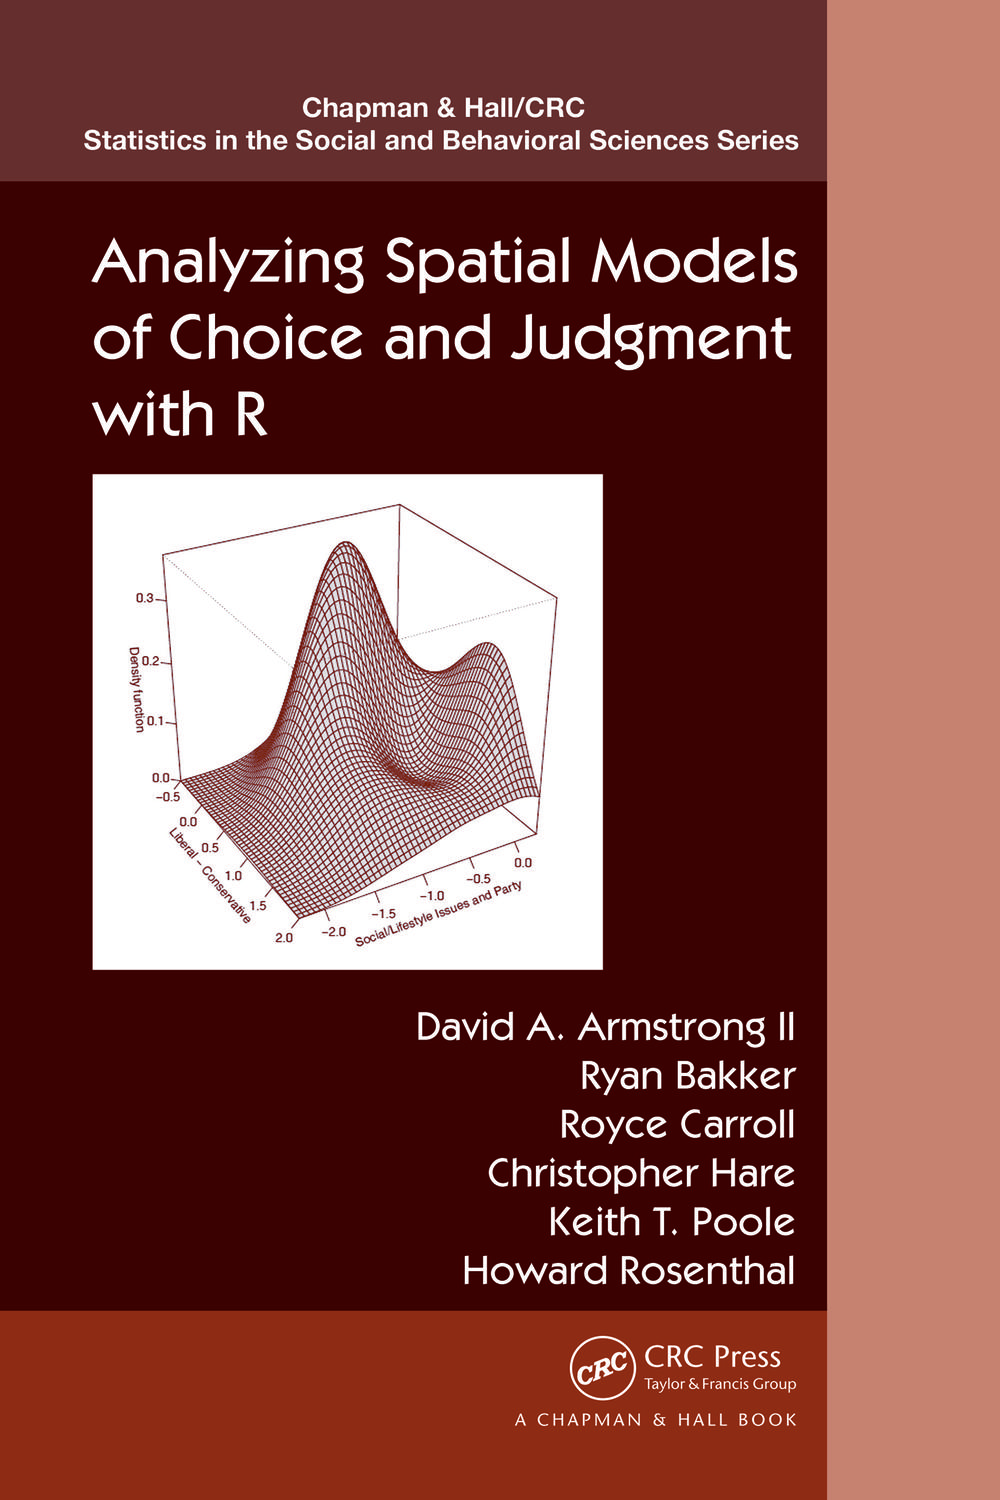 Analyzing Spatial Models of Choice and Judgment with R - David A. Armstrong II, Ryan Bakker, Royce Carroll, Christopher Hare, Keith T. Poole, Howard Rosenthal